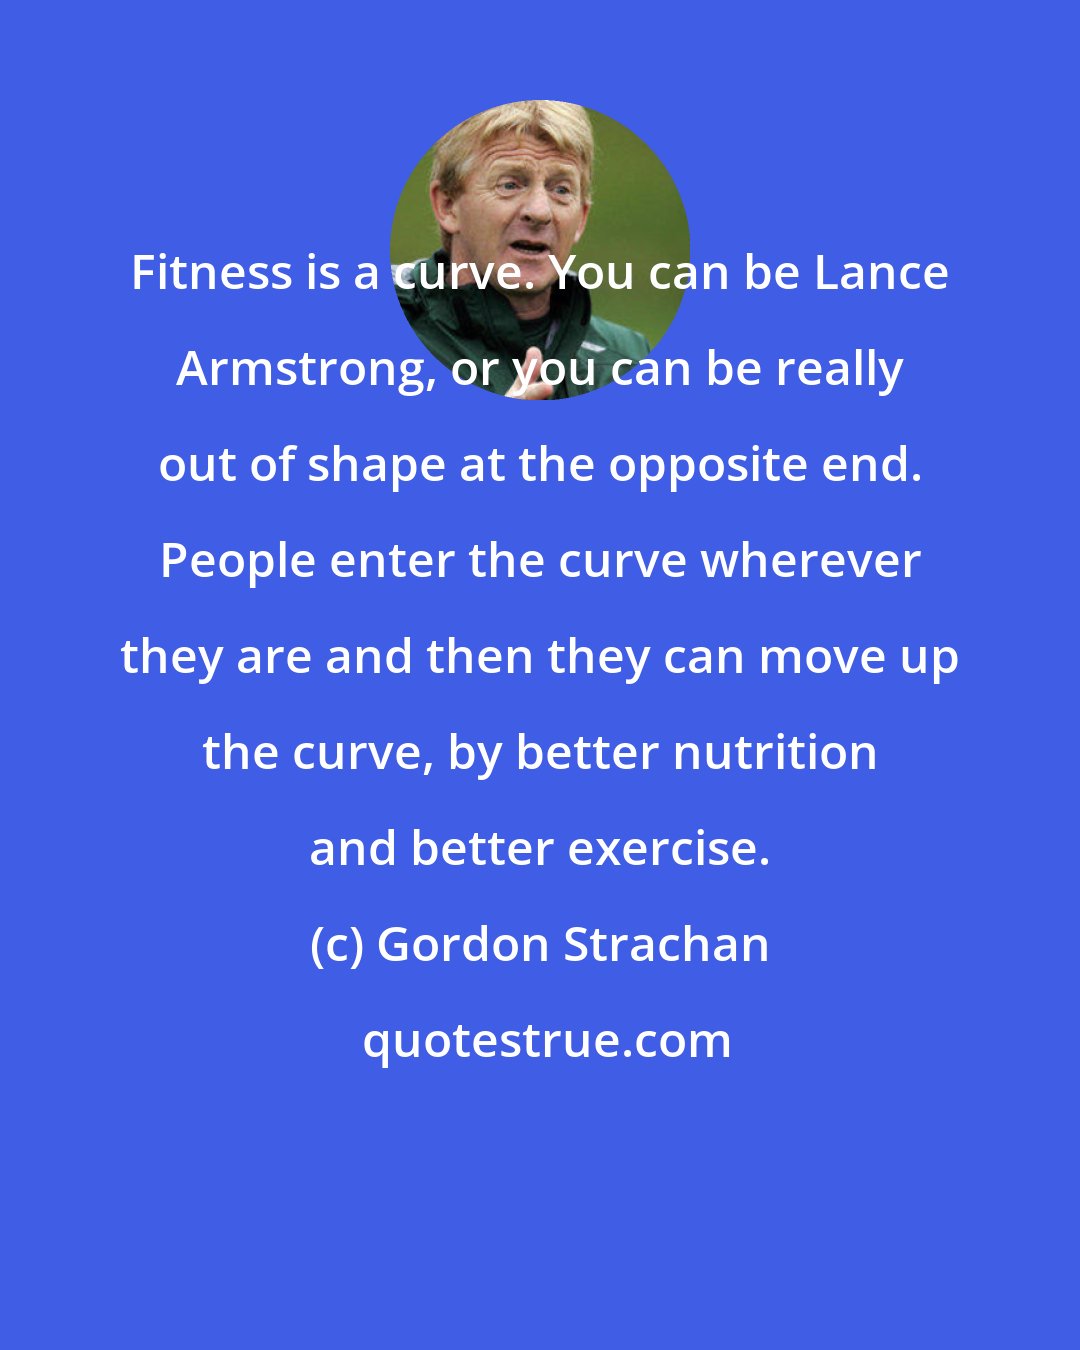 Gordon Strachan: Fitness is a curve. You can be Lance Armstrong, or you can be really out of shape at the opposite end. People enter the curve wherever they are and then they can move up the curve, by better nutrition and better exercise.